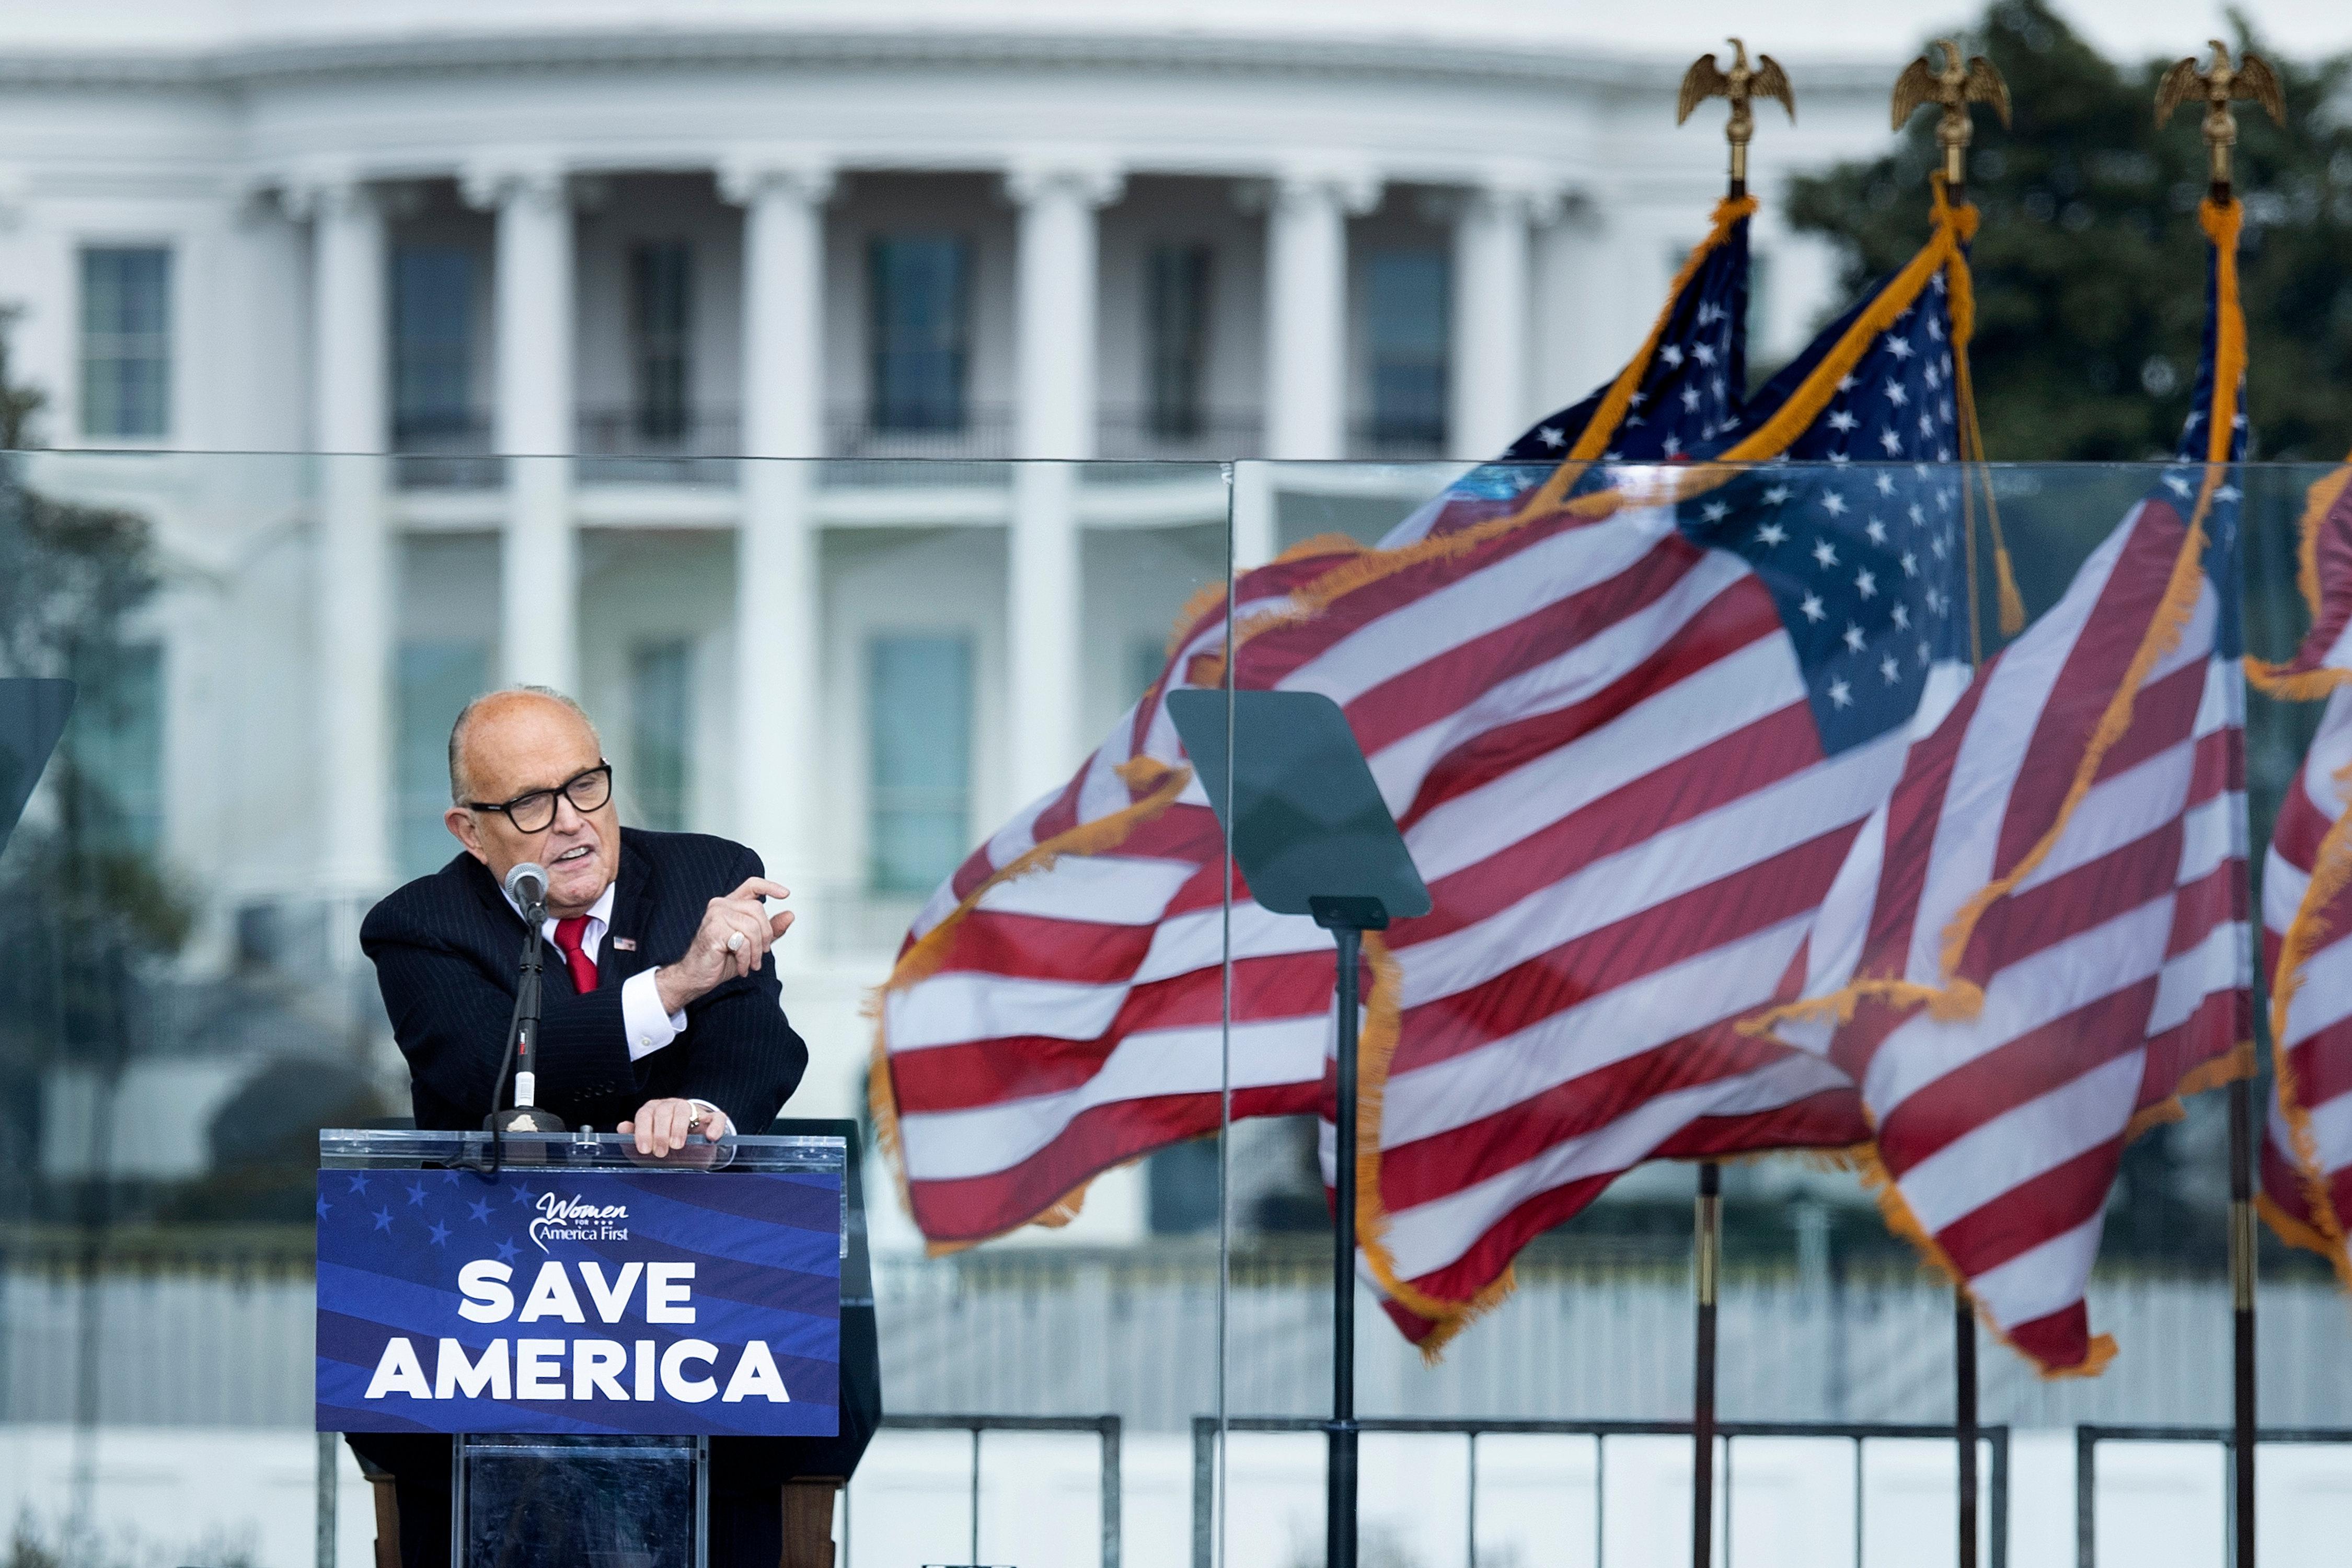 Giuliani speaks to supporters near the White House.